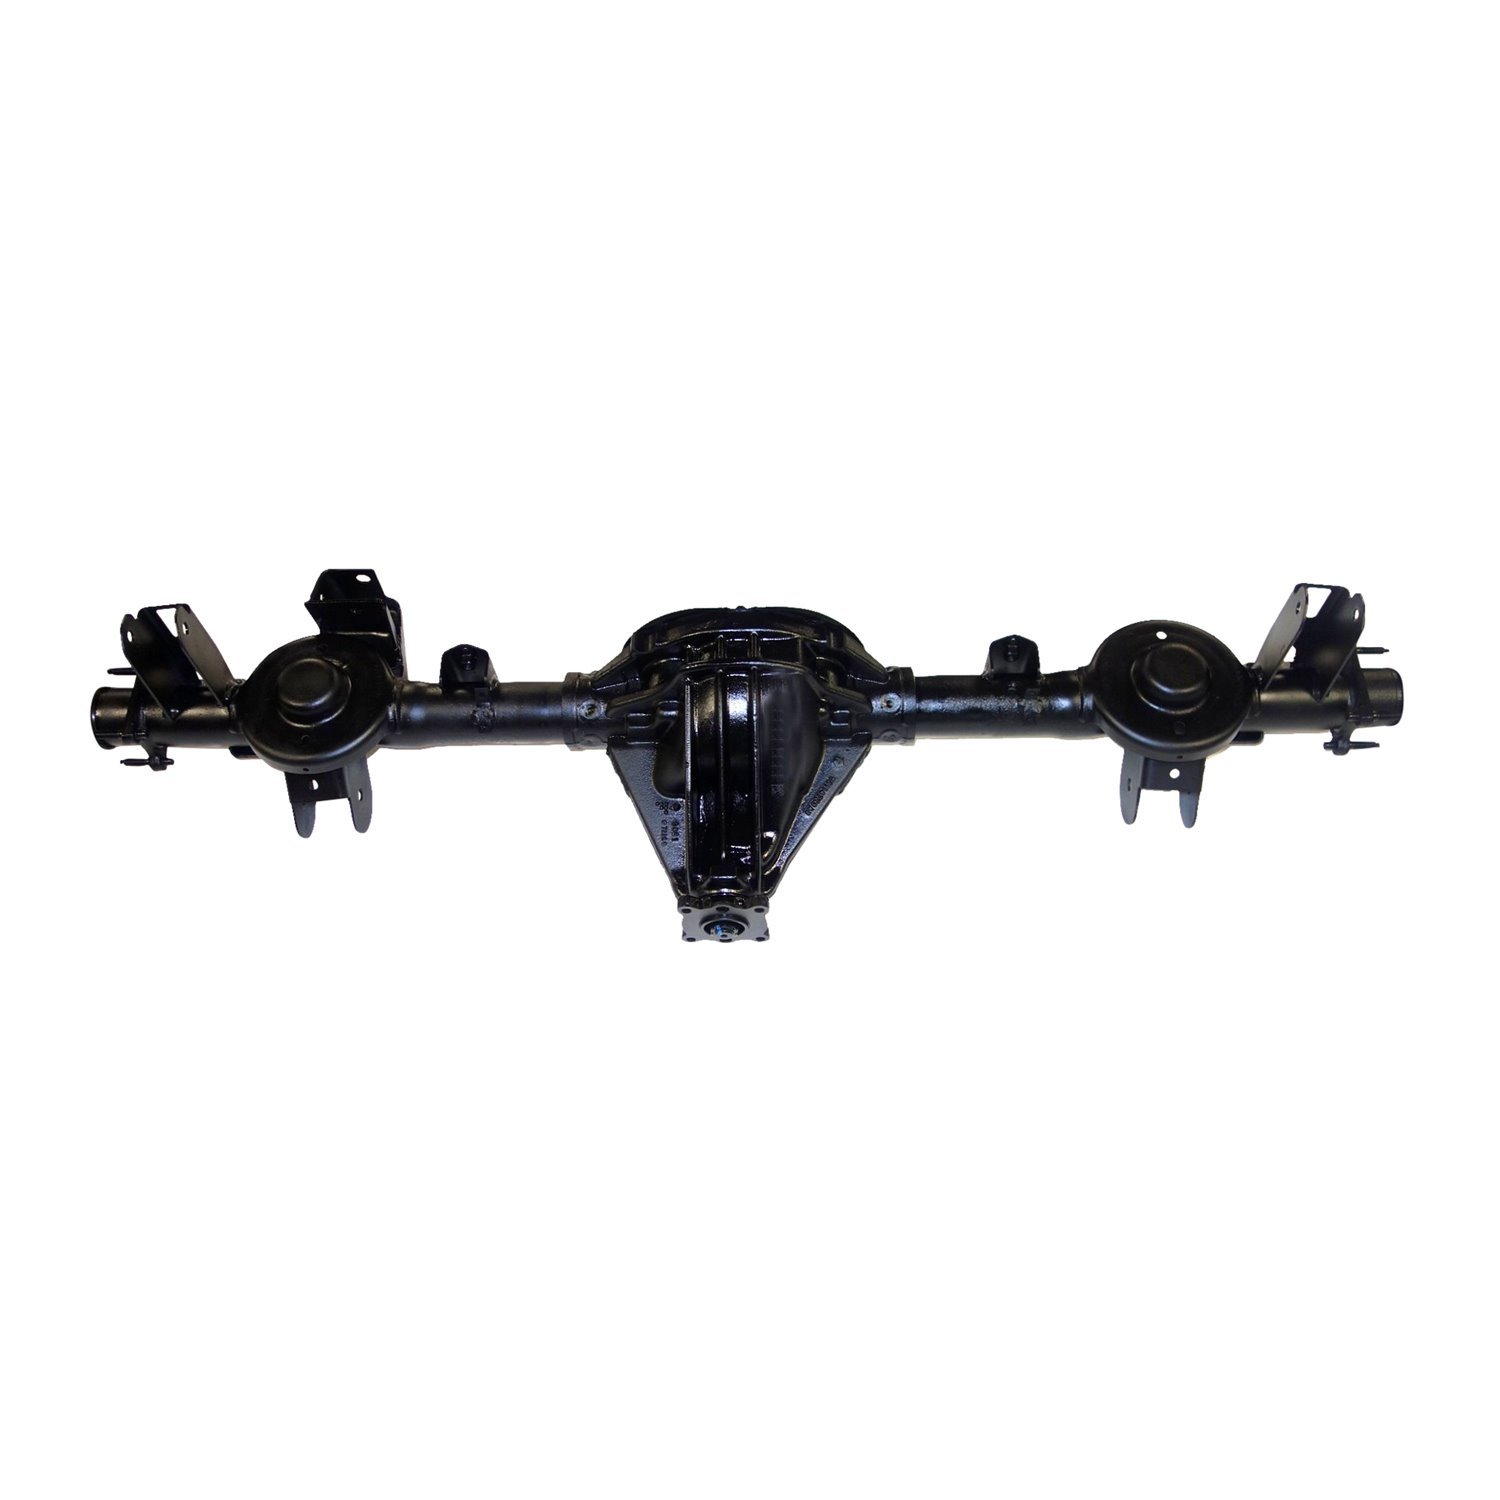 Remanufactured Axle Assy for Chy 8.25" 06-10 Commader, Grand Cherokee 3.73 w/ E-Locker